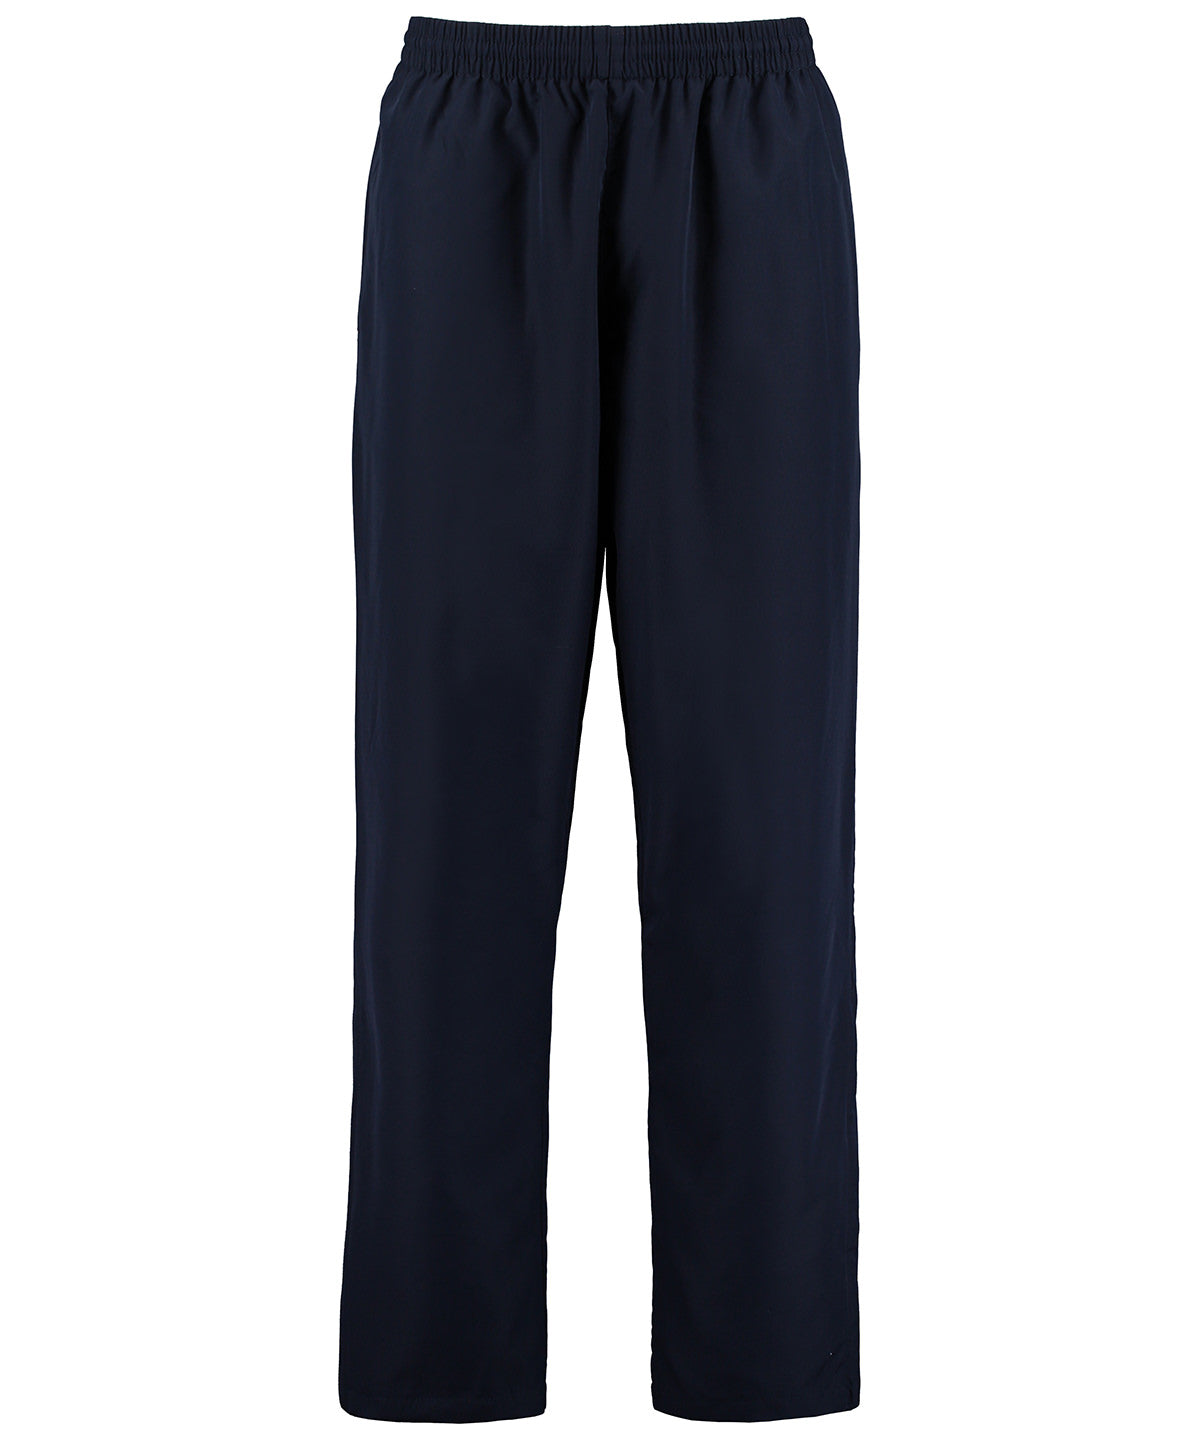 Personalised Trousers - Navy GameGear Gamegear® Cooltex® Training Pant